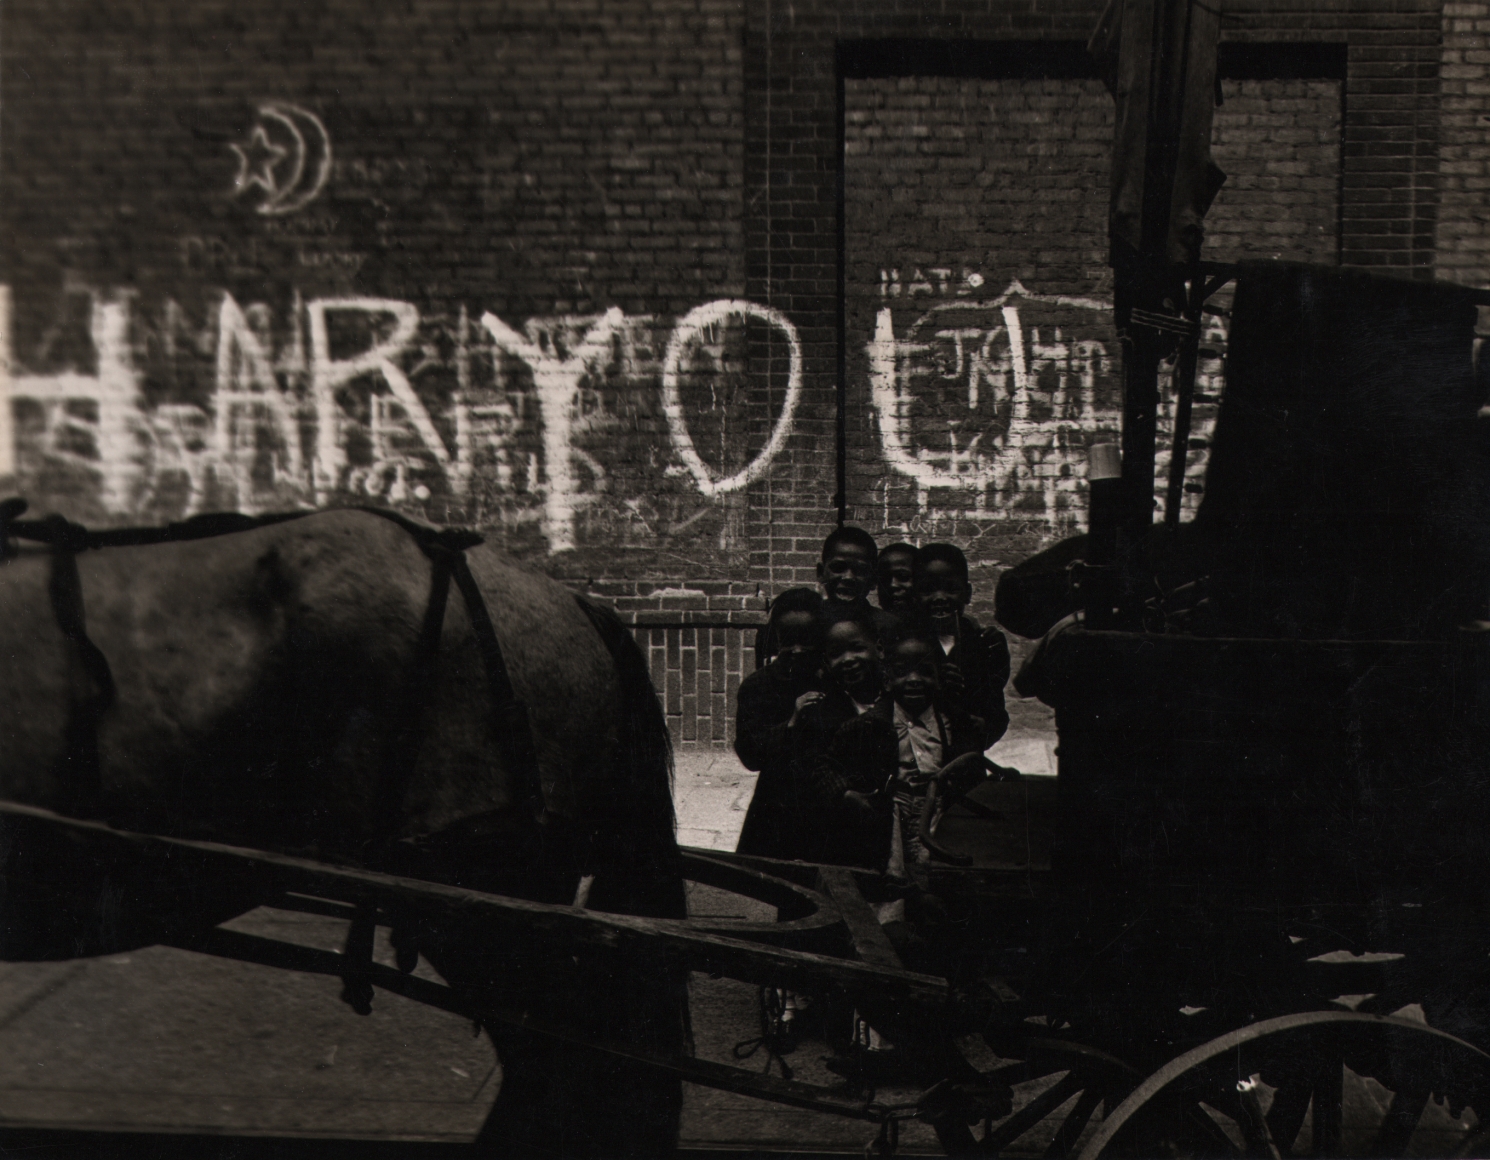 23. Shawn Walker, HarYourAct, ​1963. A group of six children stand behind a horse-drawn carriage in the foreground. The background is a graffiti-covered brick wall.